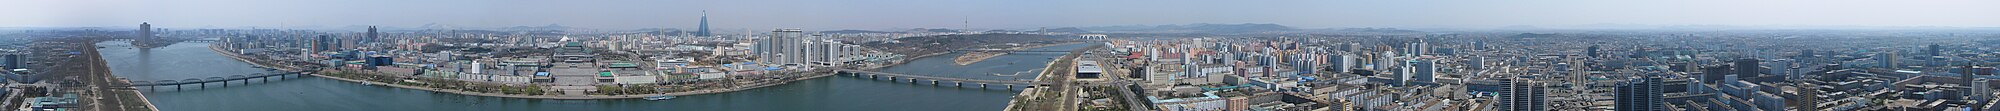 A panoramic view of Pyongyang from atop the Juche tower